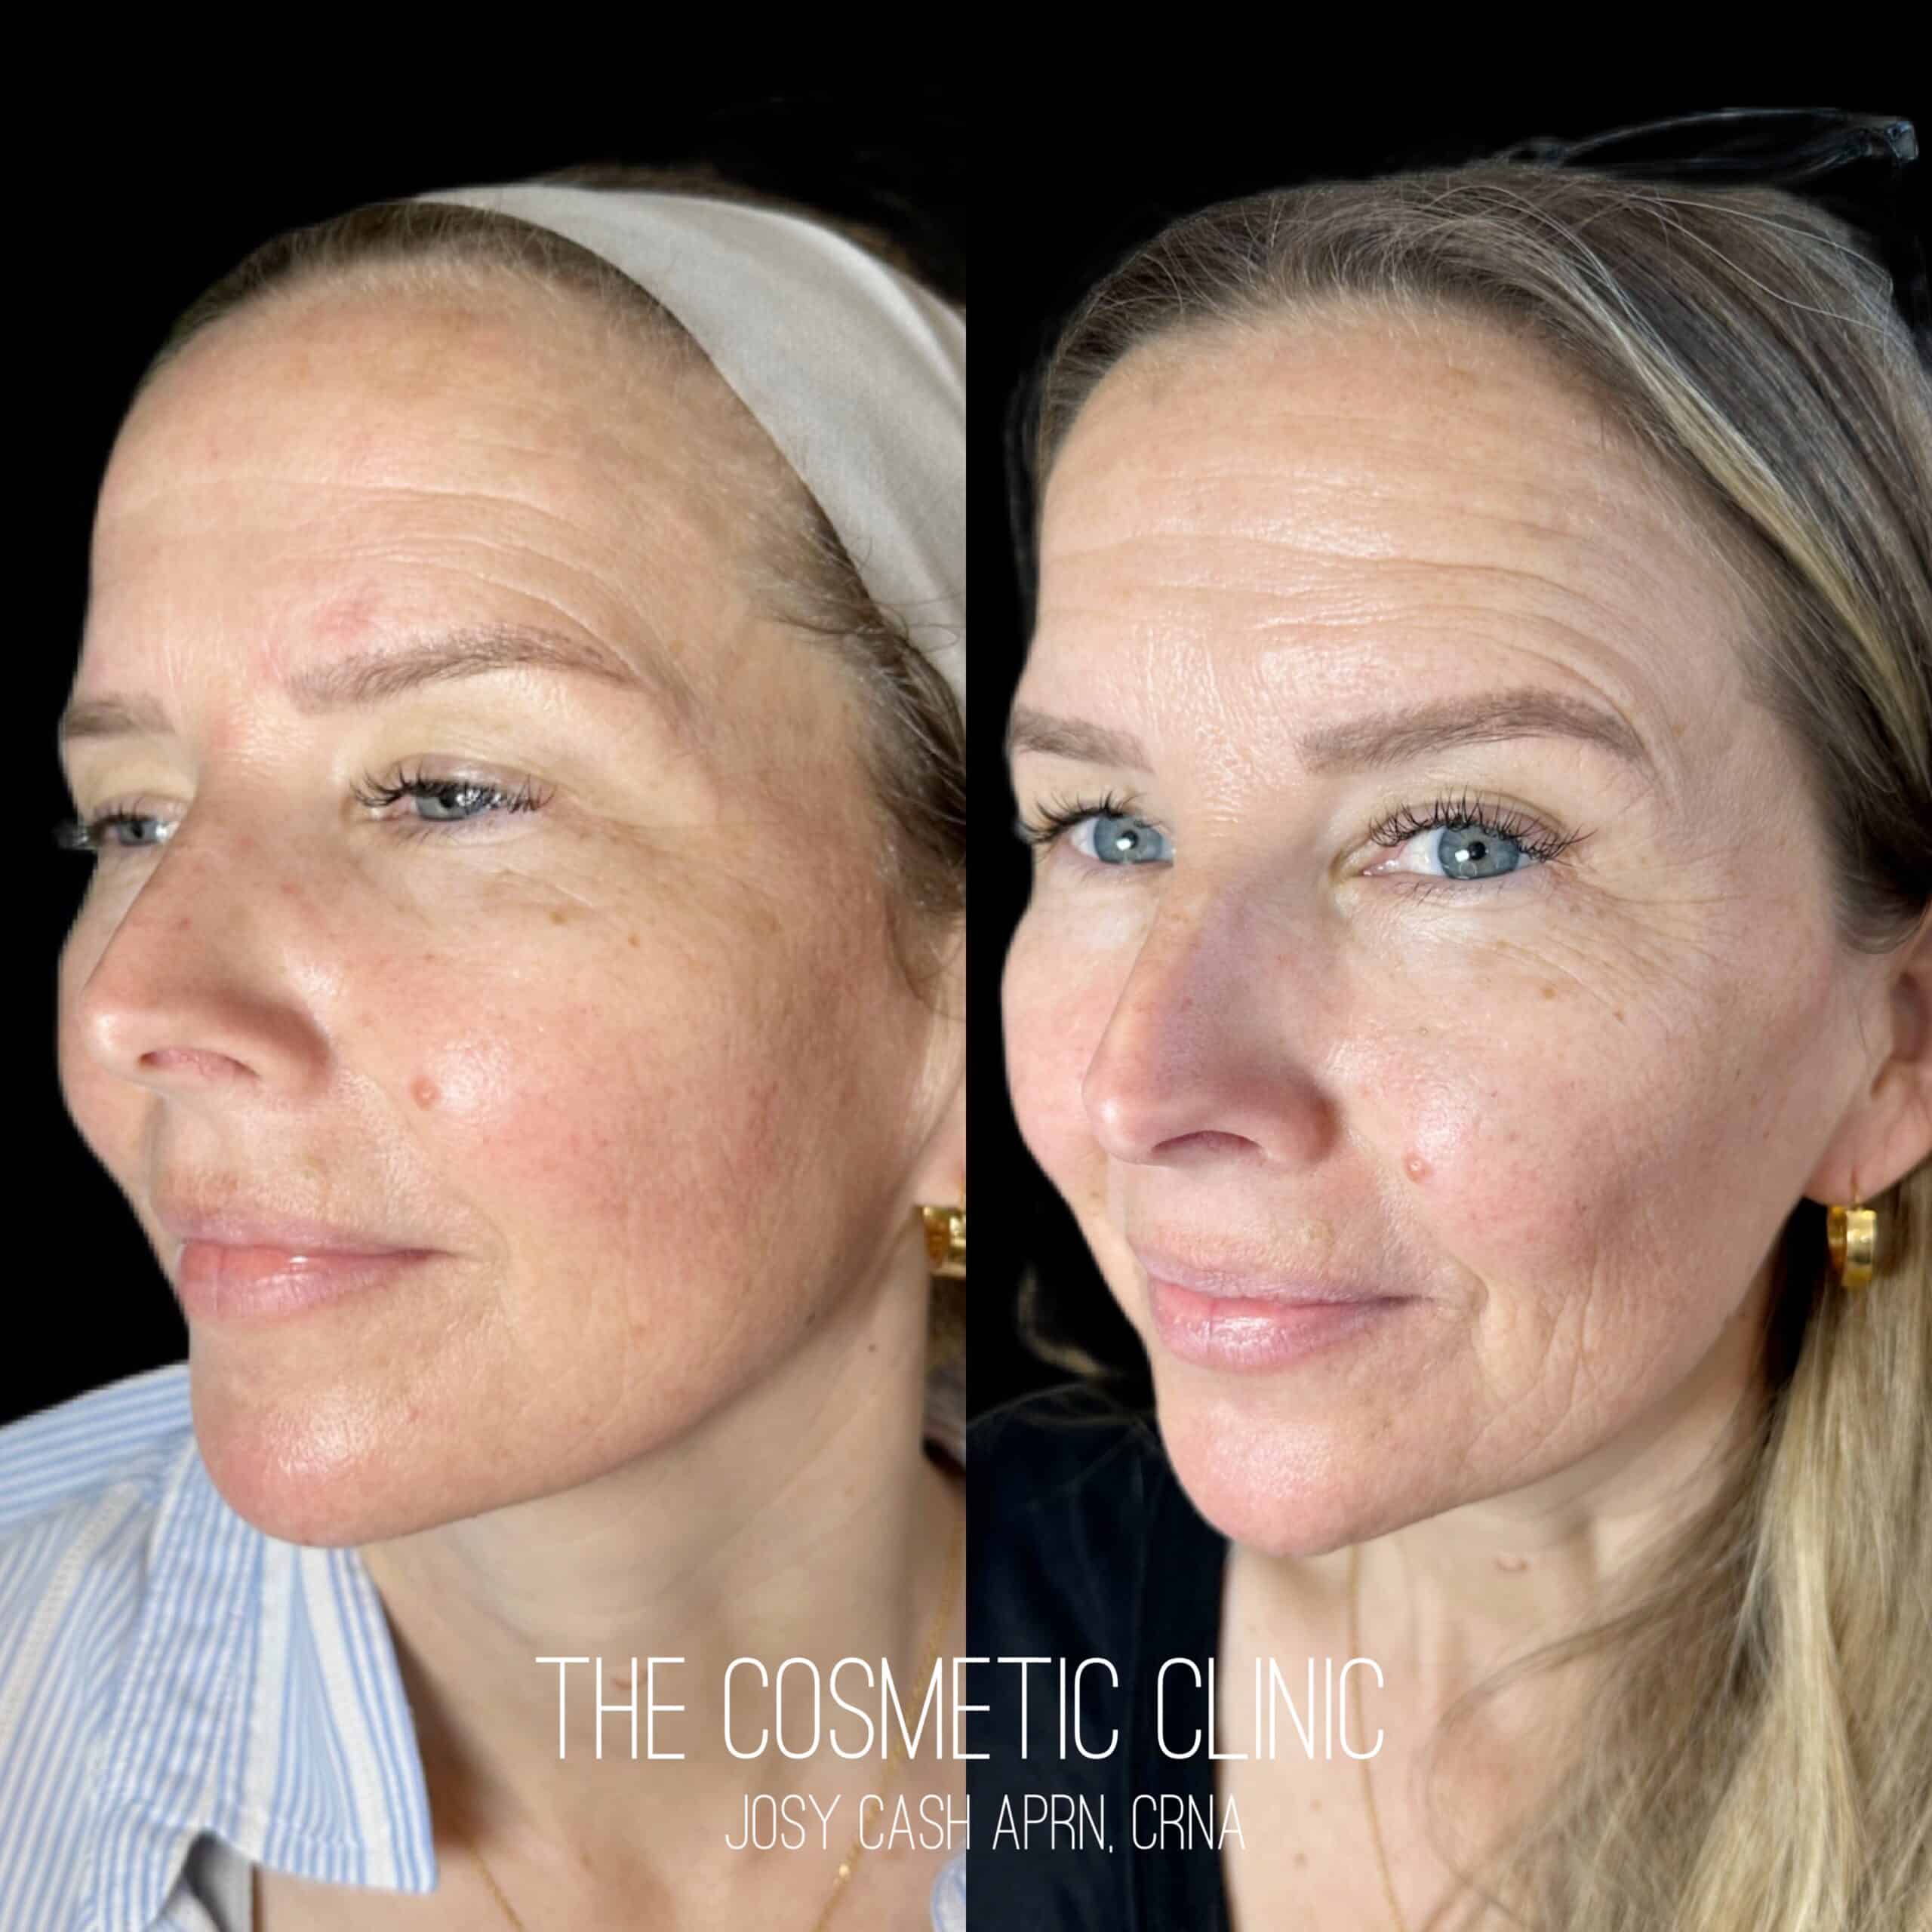 Female Dermal Filler Before and After Photos with The Cosmetic Clinic JOSY CASH APRN,CRNA | The Cosmetic Clinic in Greenwich, CT